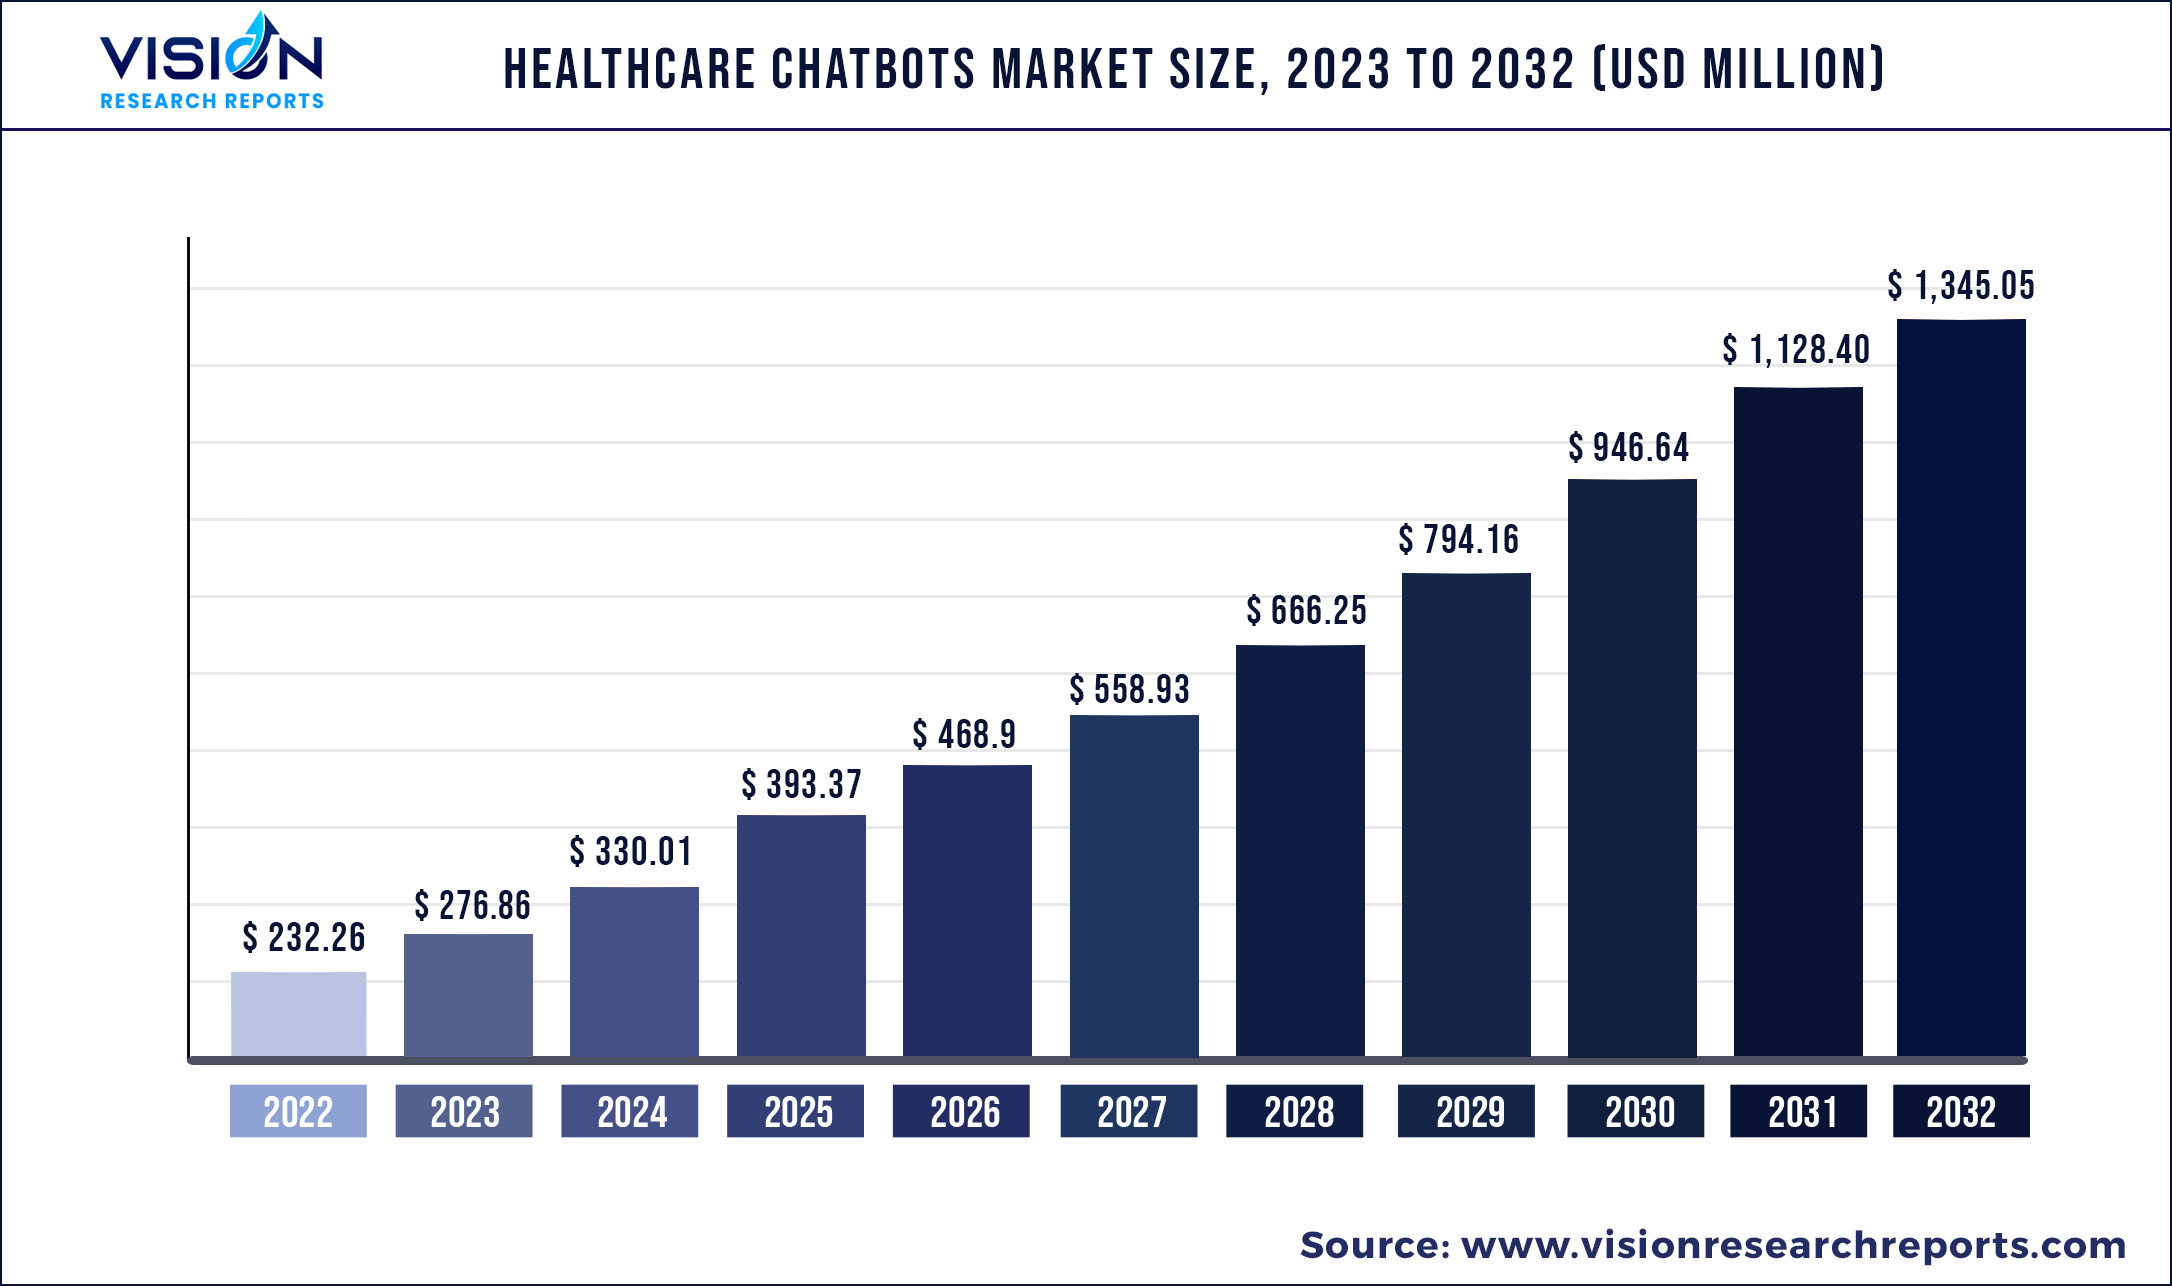 Healthcare Chatbots Market Size 2023 to 2032